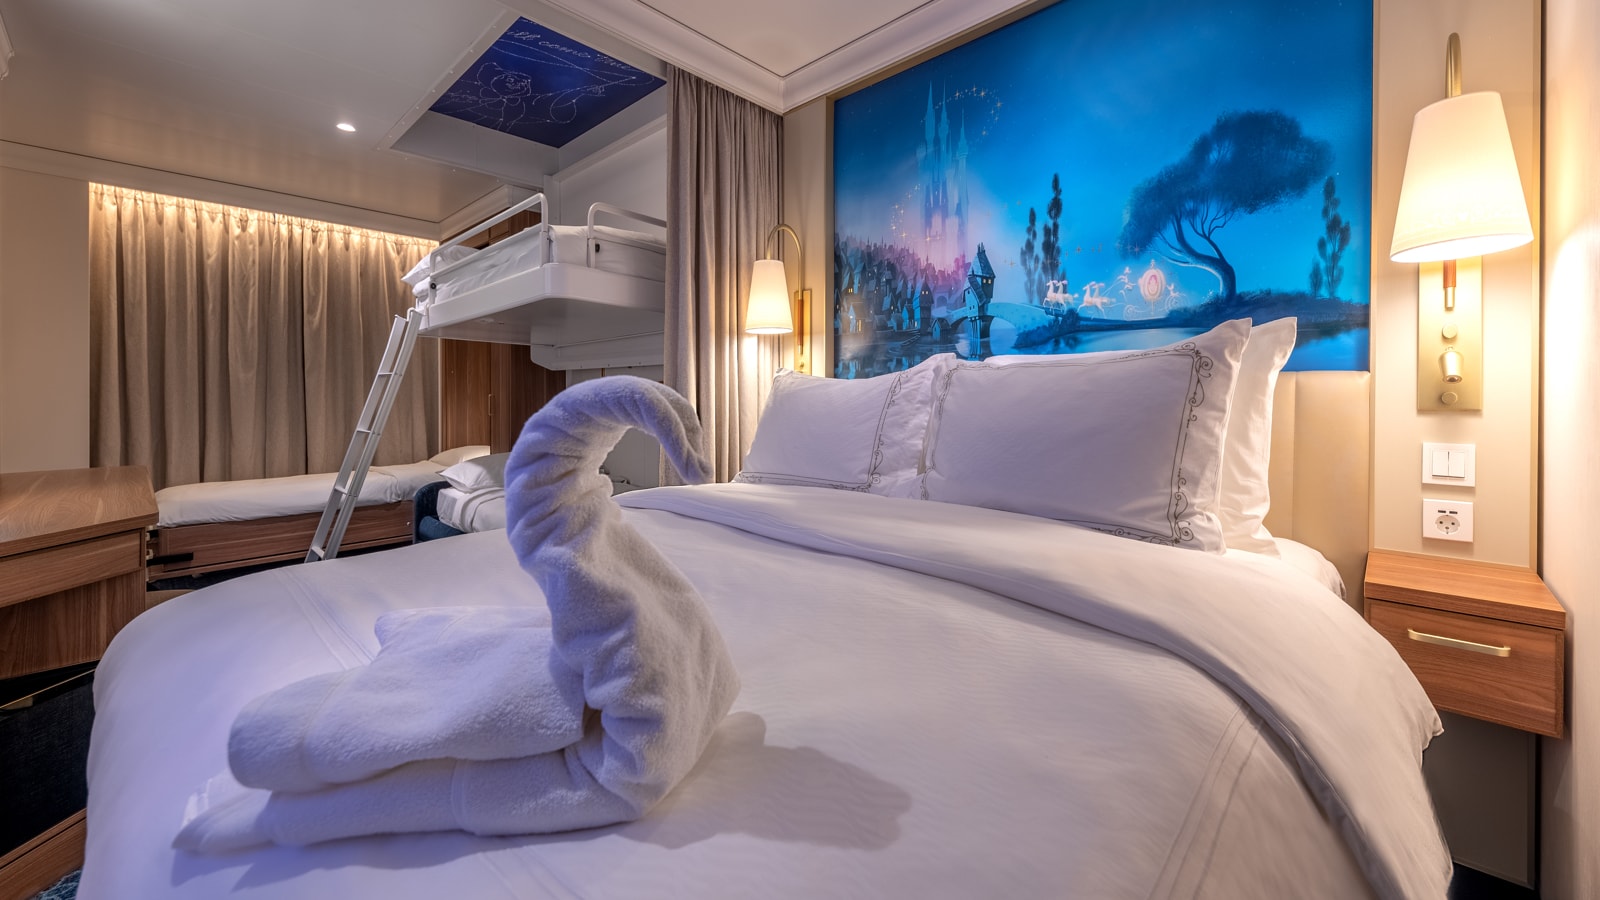 video-more-details-revealed-about-the-disney-wish-staterooms-disney